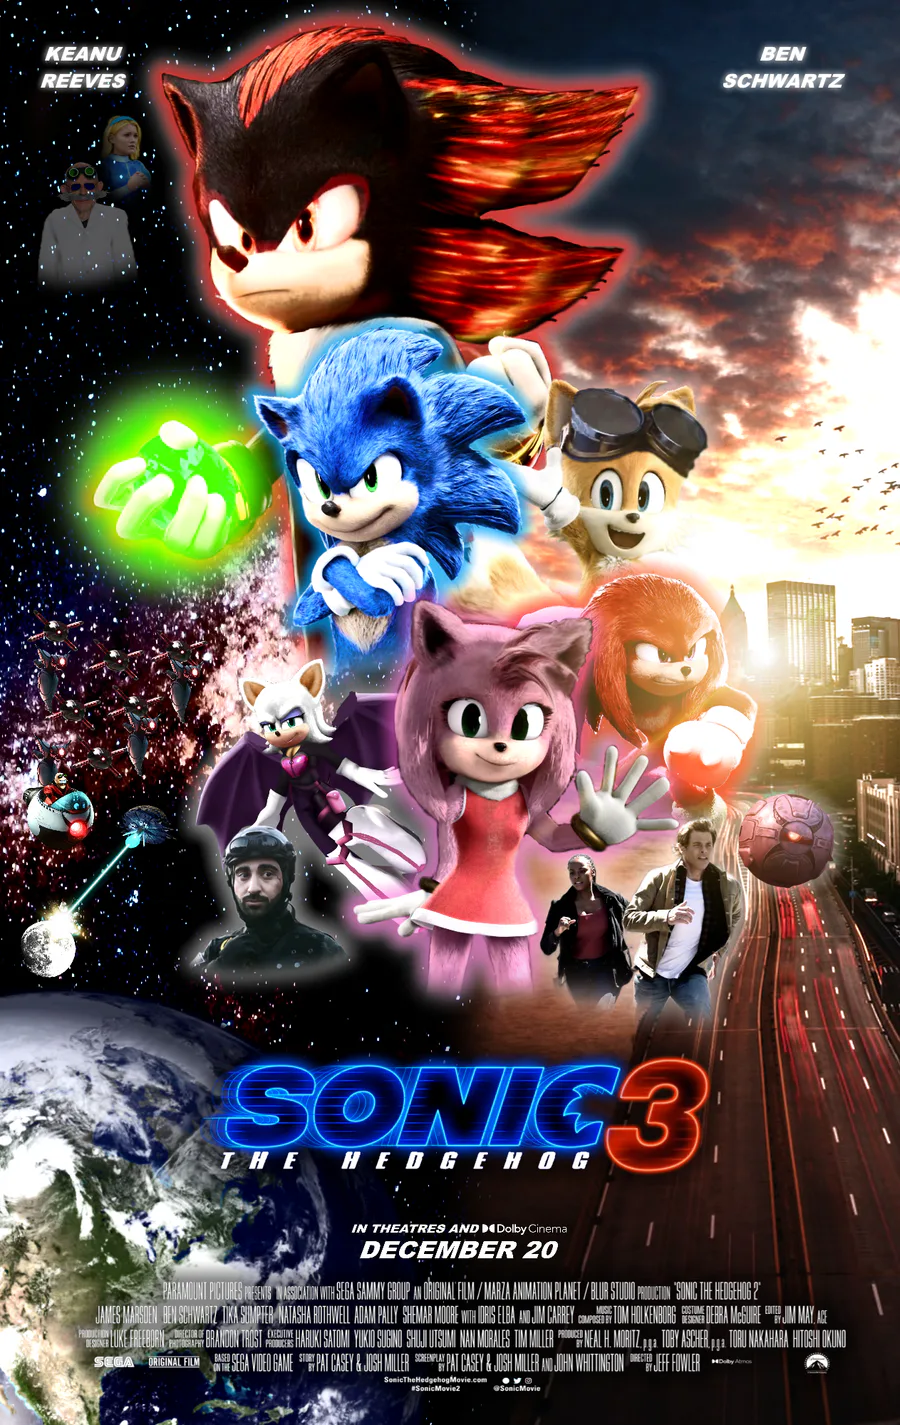 Samuel Lukas The Hedgehog on Game Jolt: Sonic Movie 2 (Game Edition) Poster  4